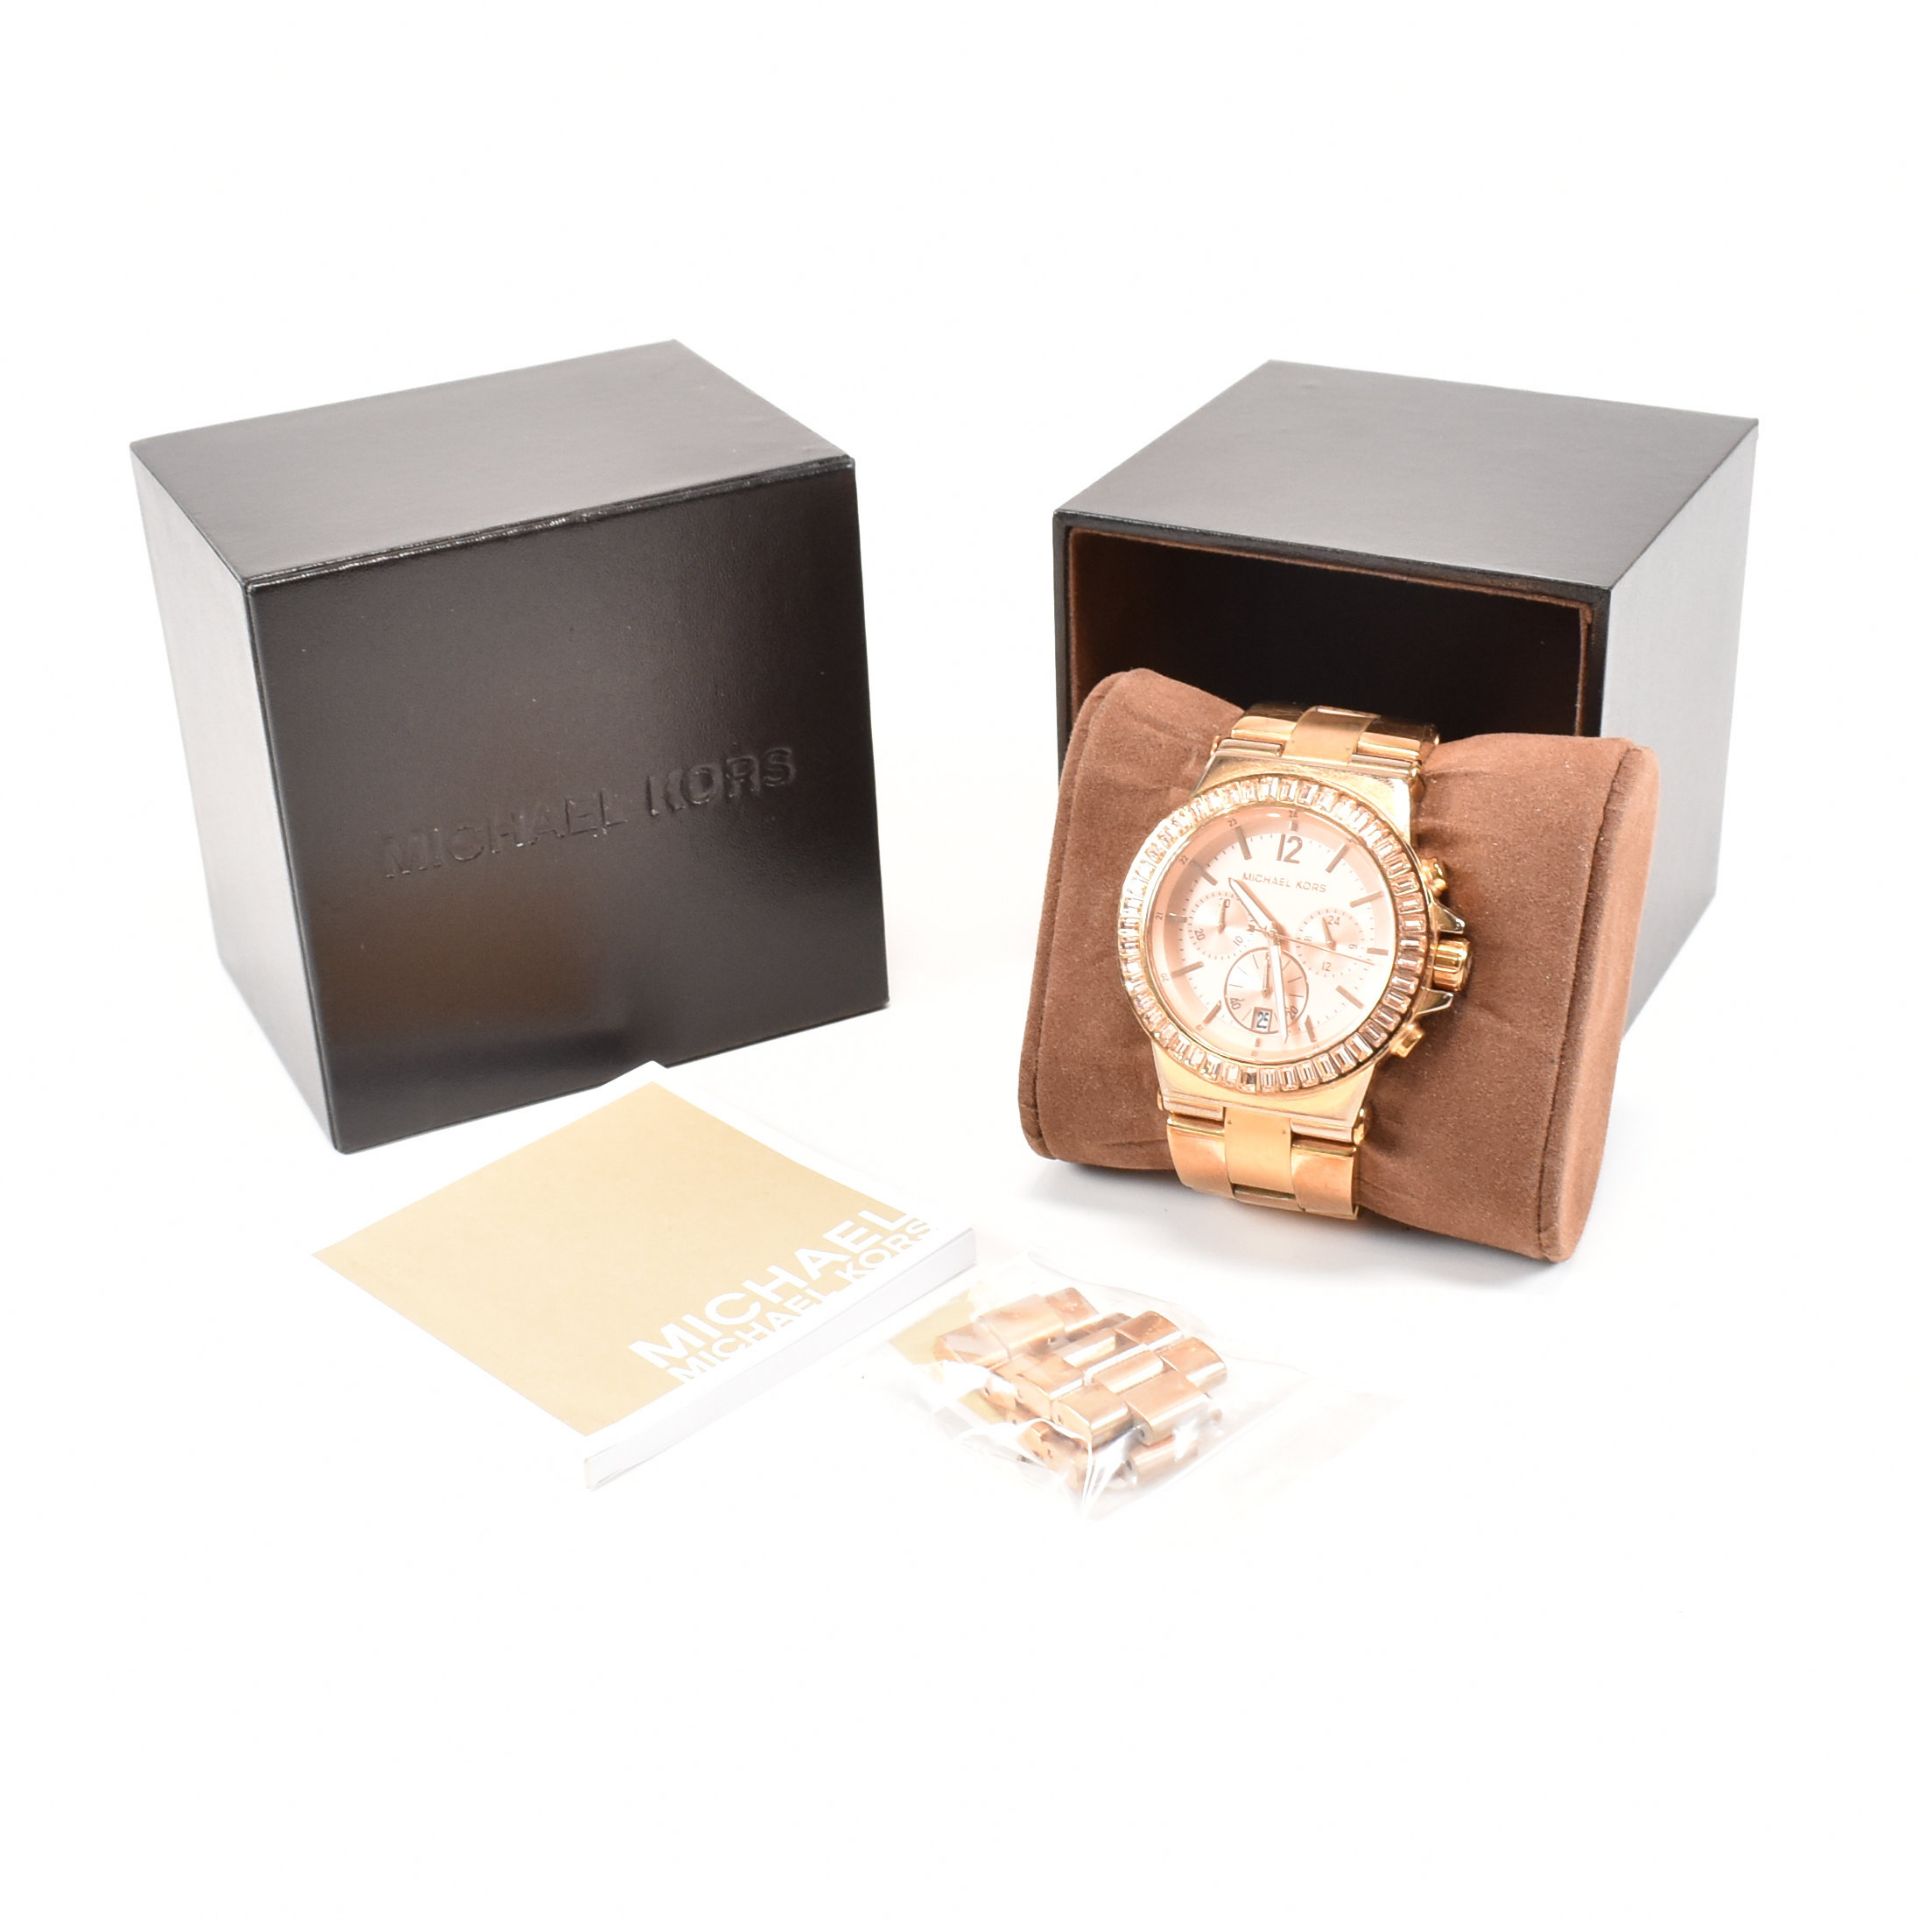 MICHAEL KORS STAINLESS STEEL GOLD TONE WRISTWATCH